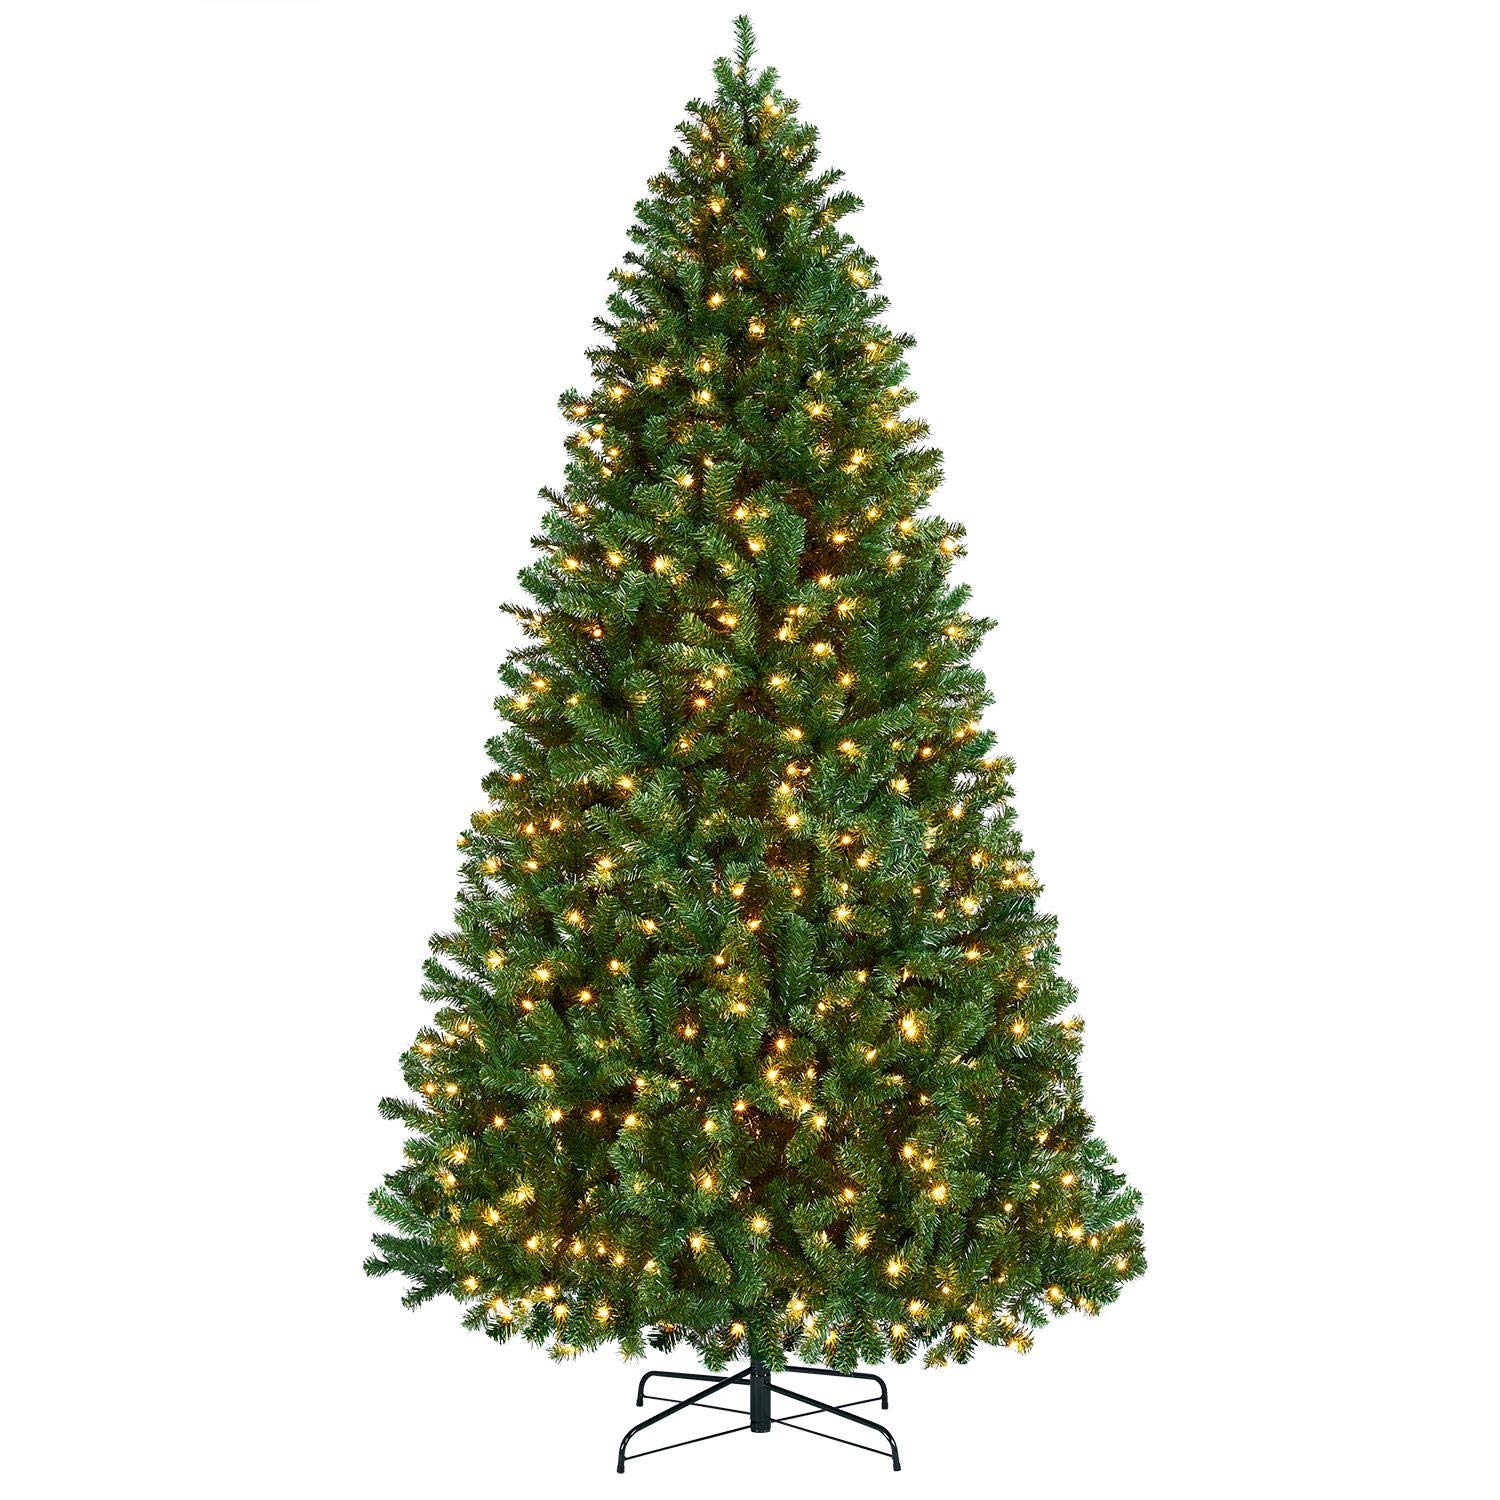 Yaheetech 9ft Pre-lit Spruce Artificial Hinged Christmas Pine Tree Prelighted Holiday Xmas Tree for Home Party Decoration with 850 Warm White Lights and 2160 Branch Tips, Green